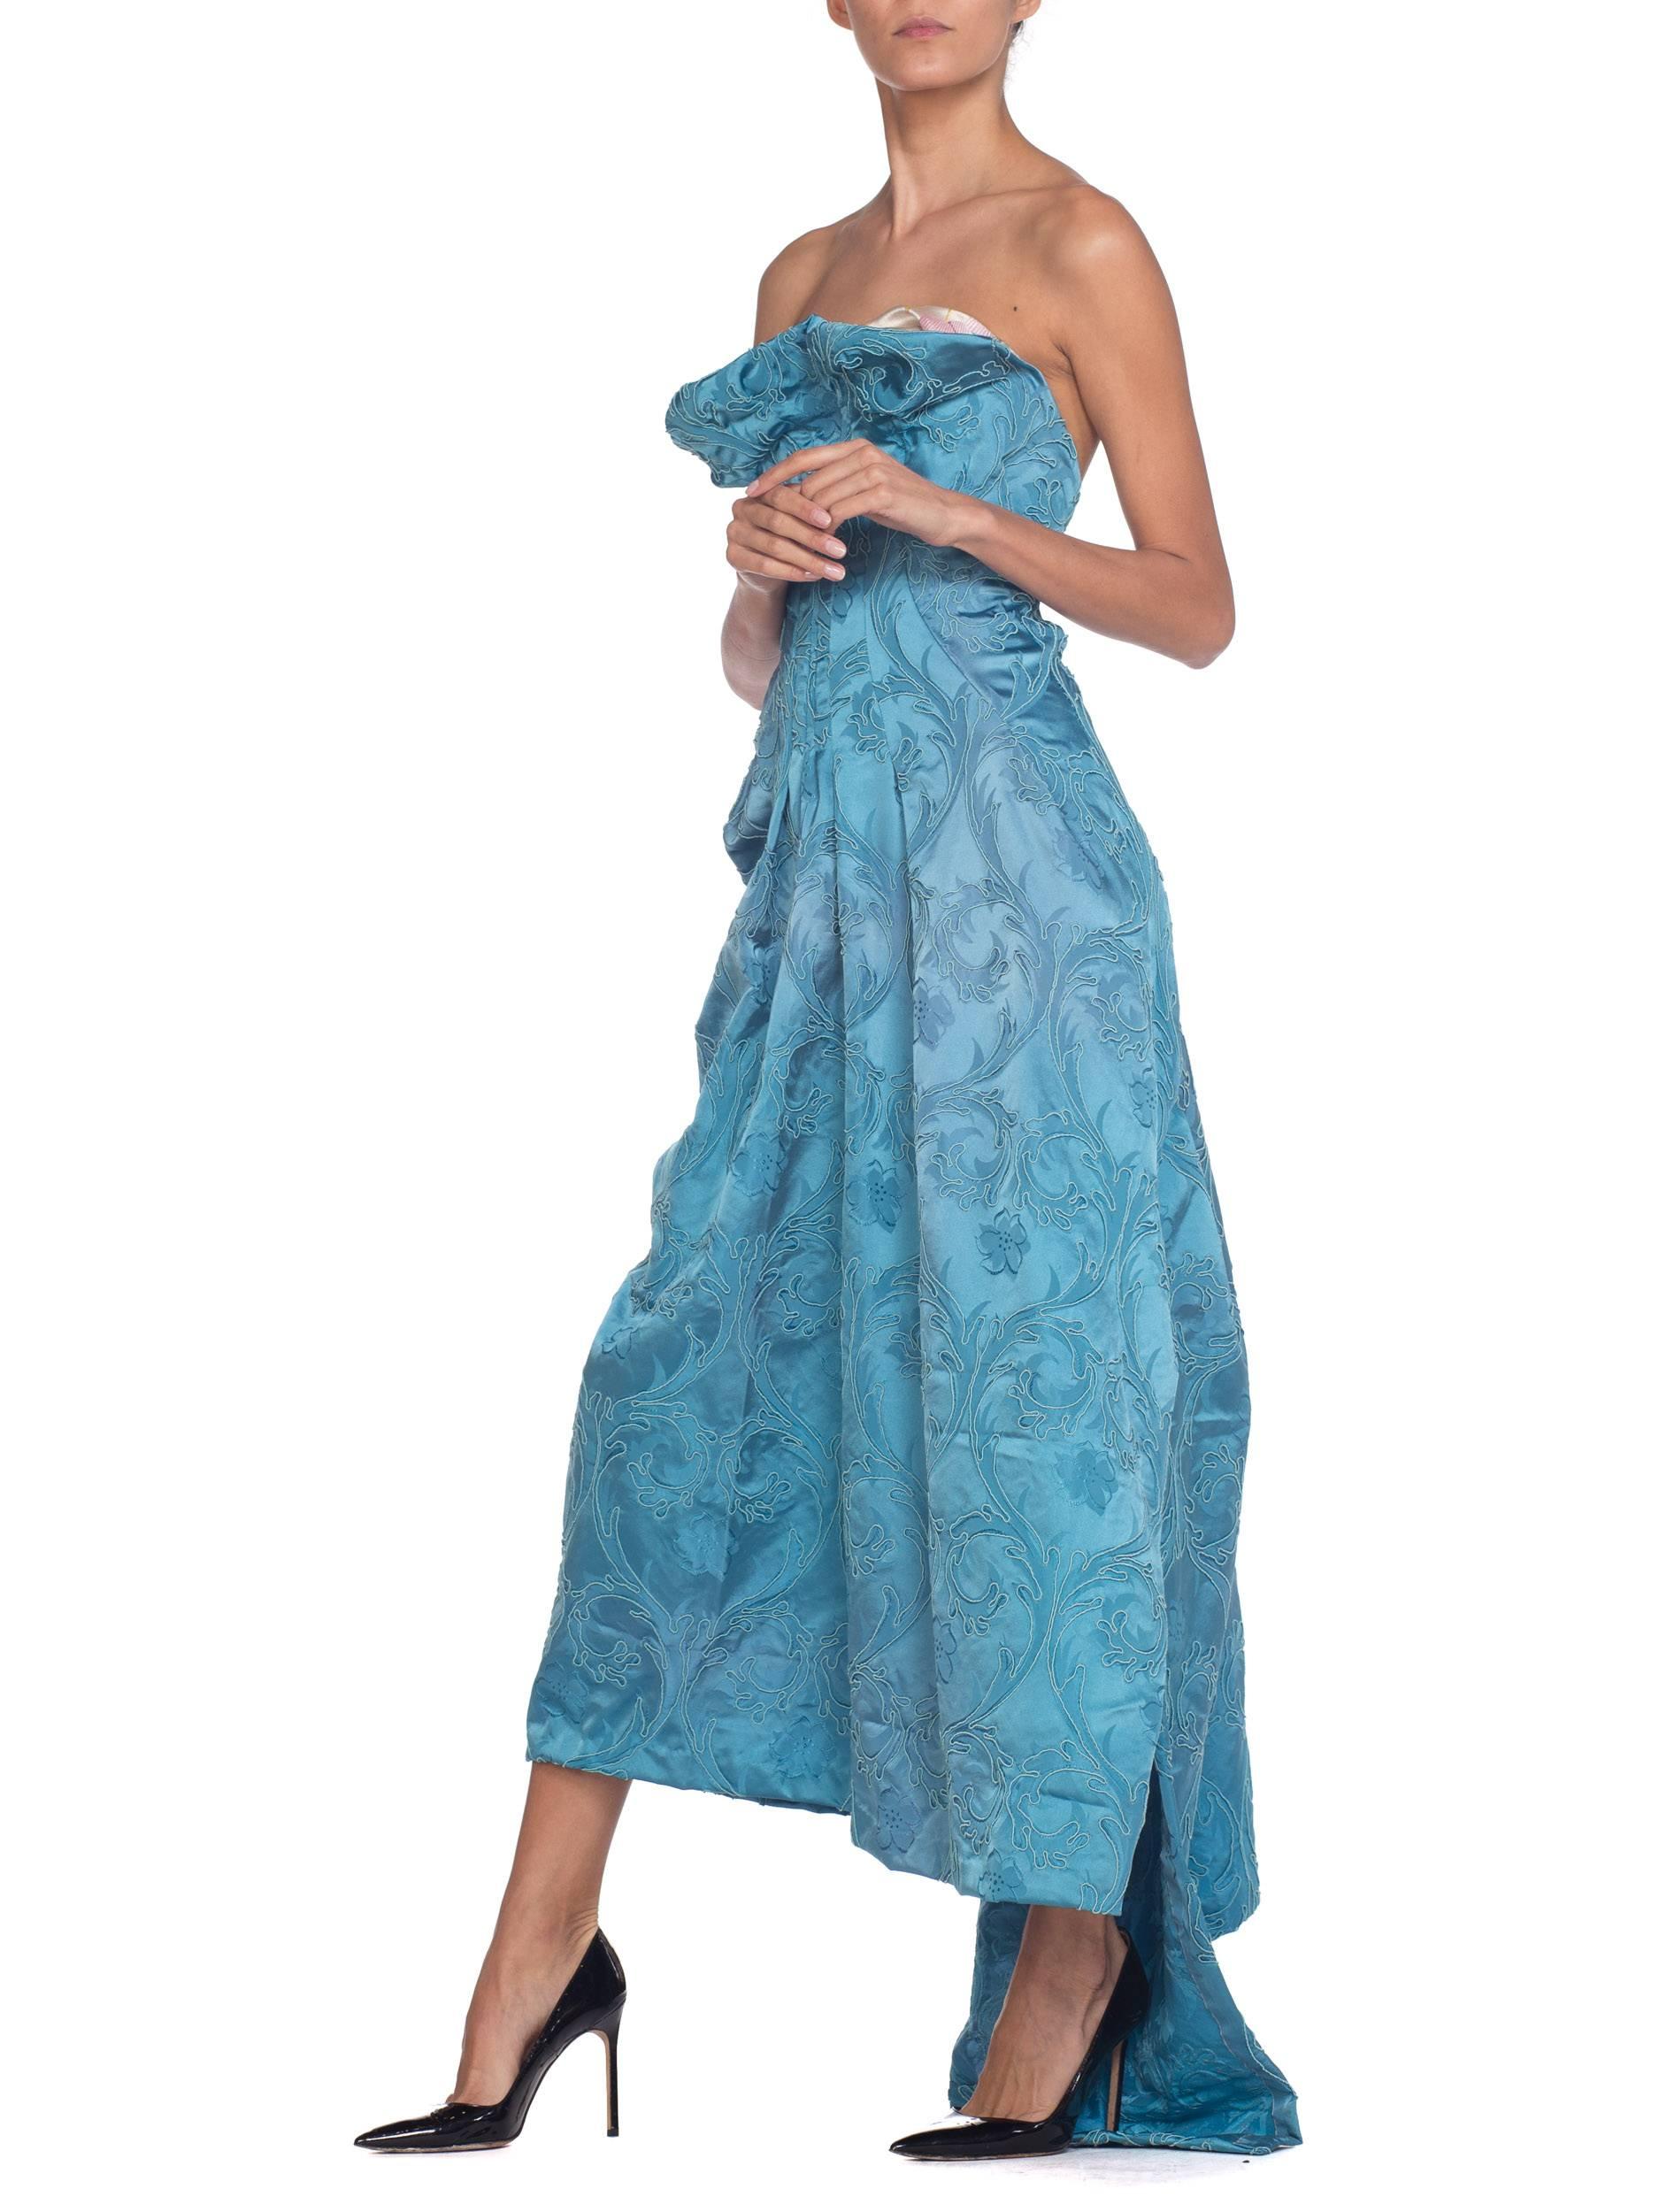 Morphew Strapless Gown with Boning Made from 1950s Blue Satin Demask  4